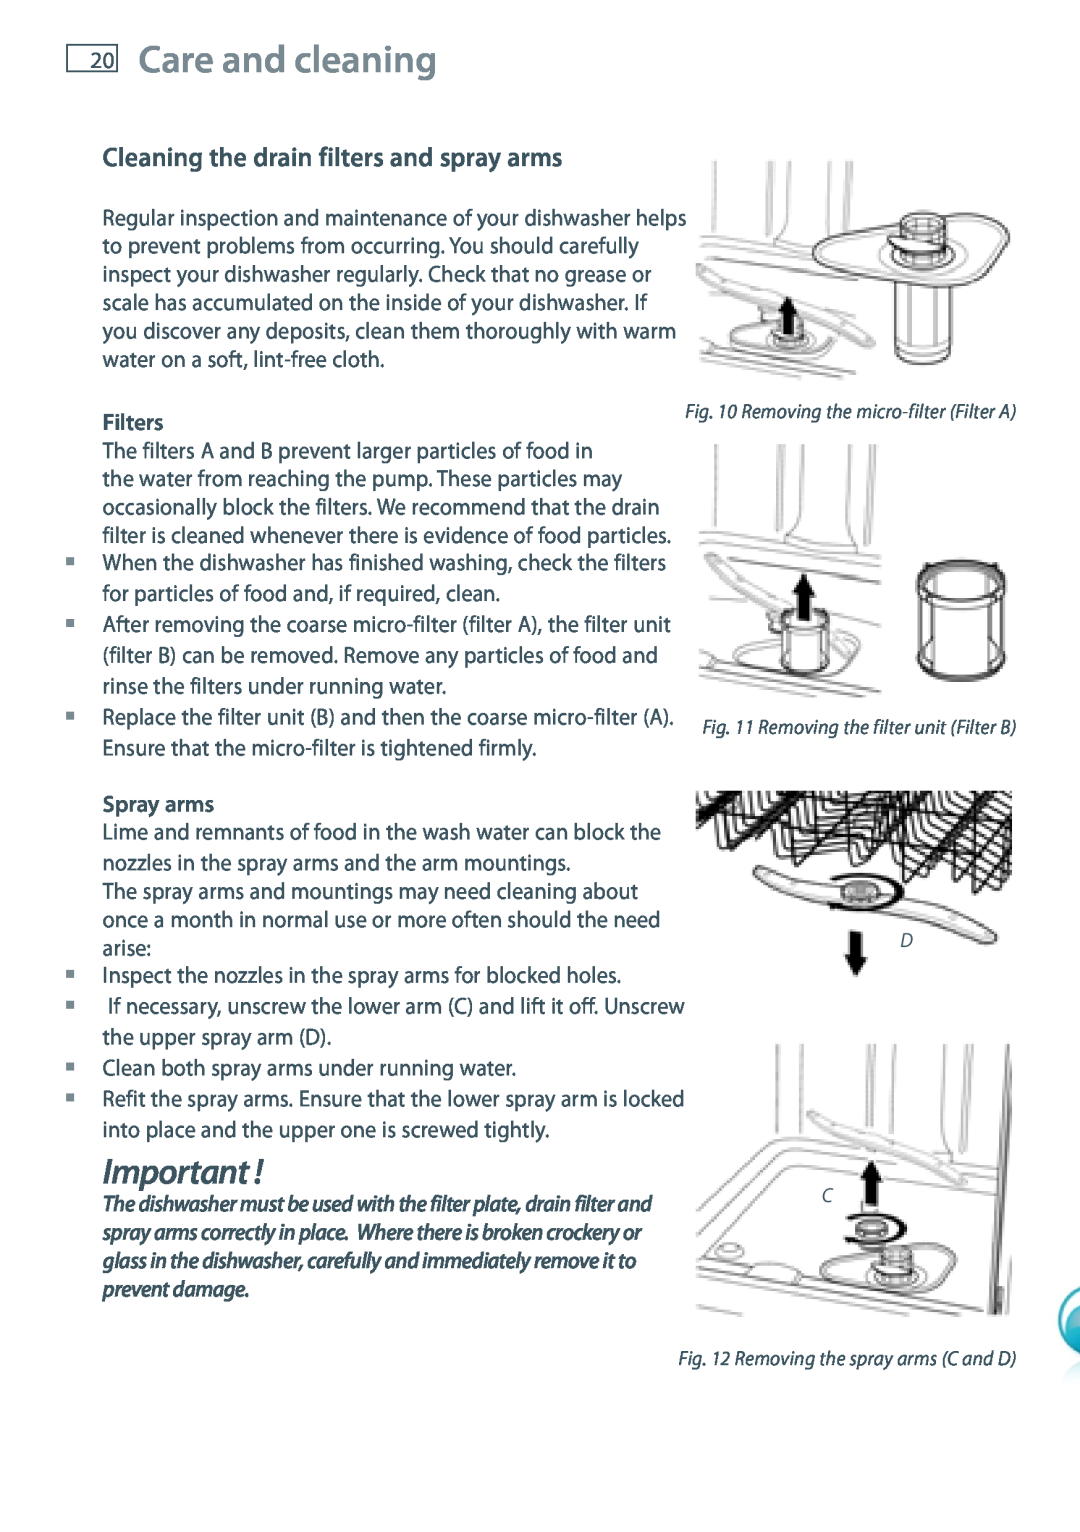 Fisher & Paykel DW60 installation instructions Care and cleaning, Cleaning the drain filters and spray arms, prevent damage 